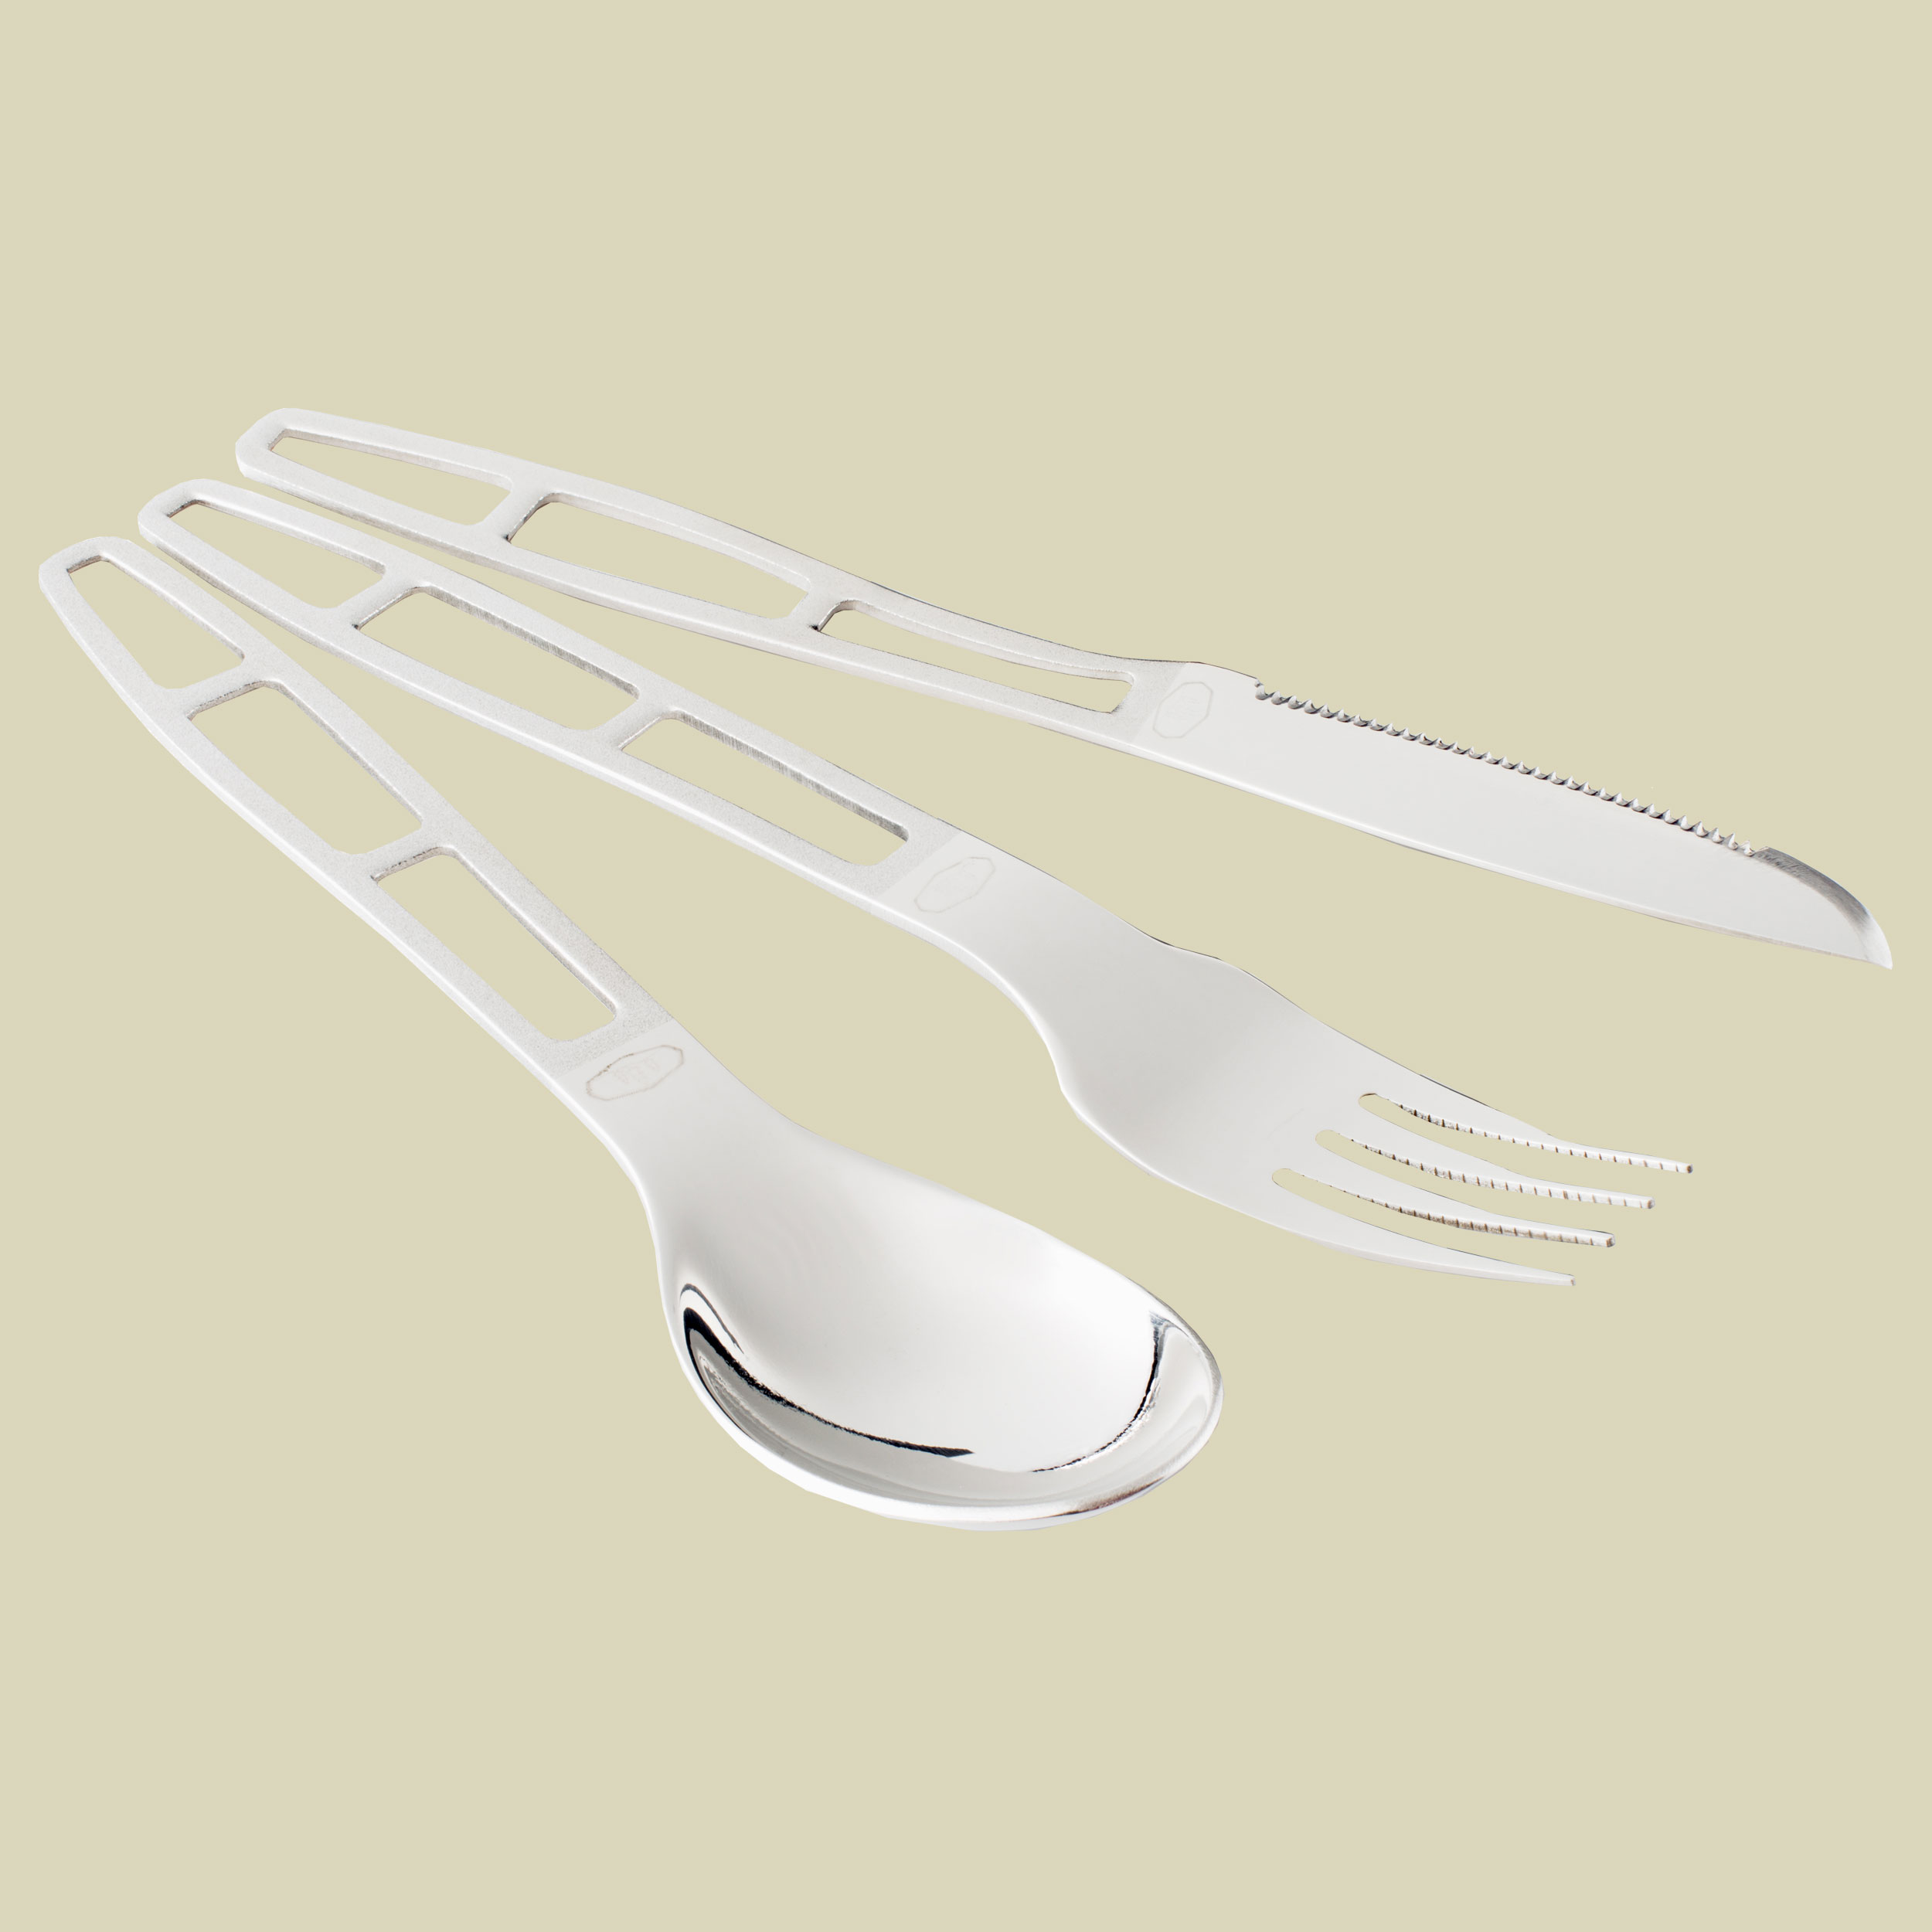 Glacier Stainless 3 PC Cutlery Set